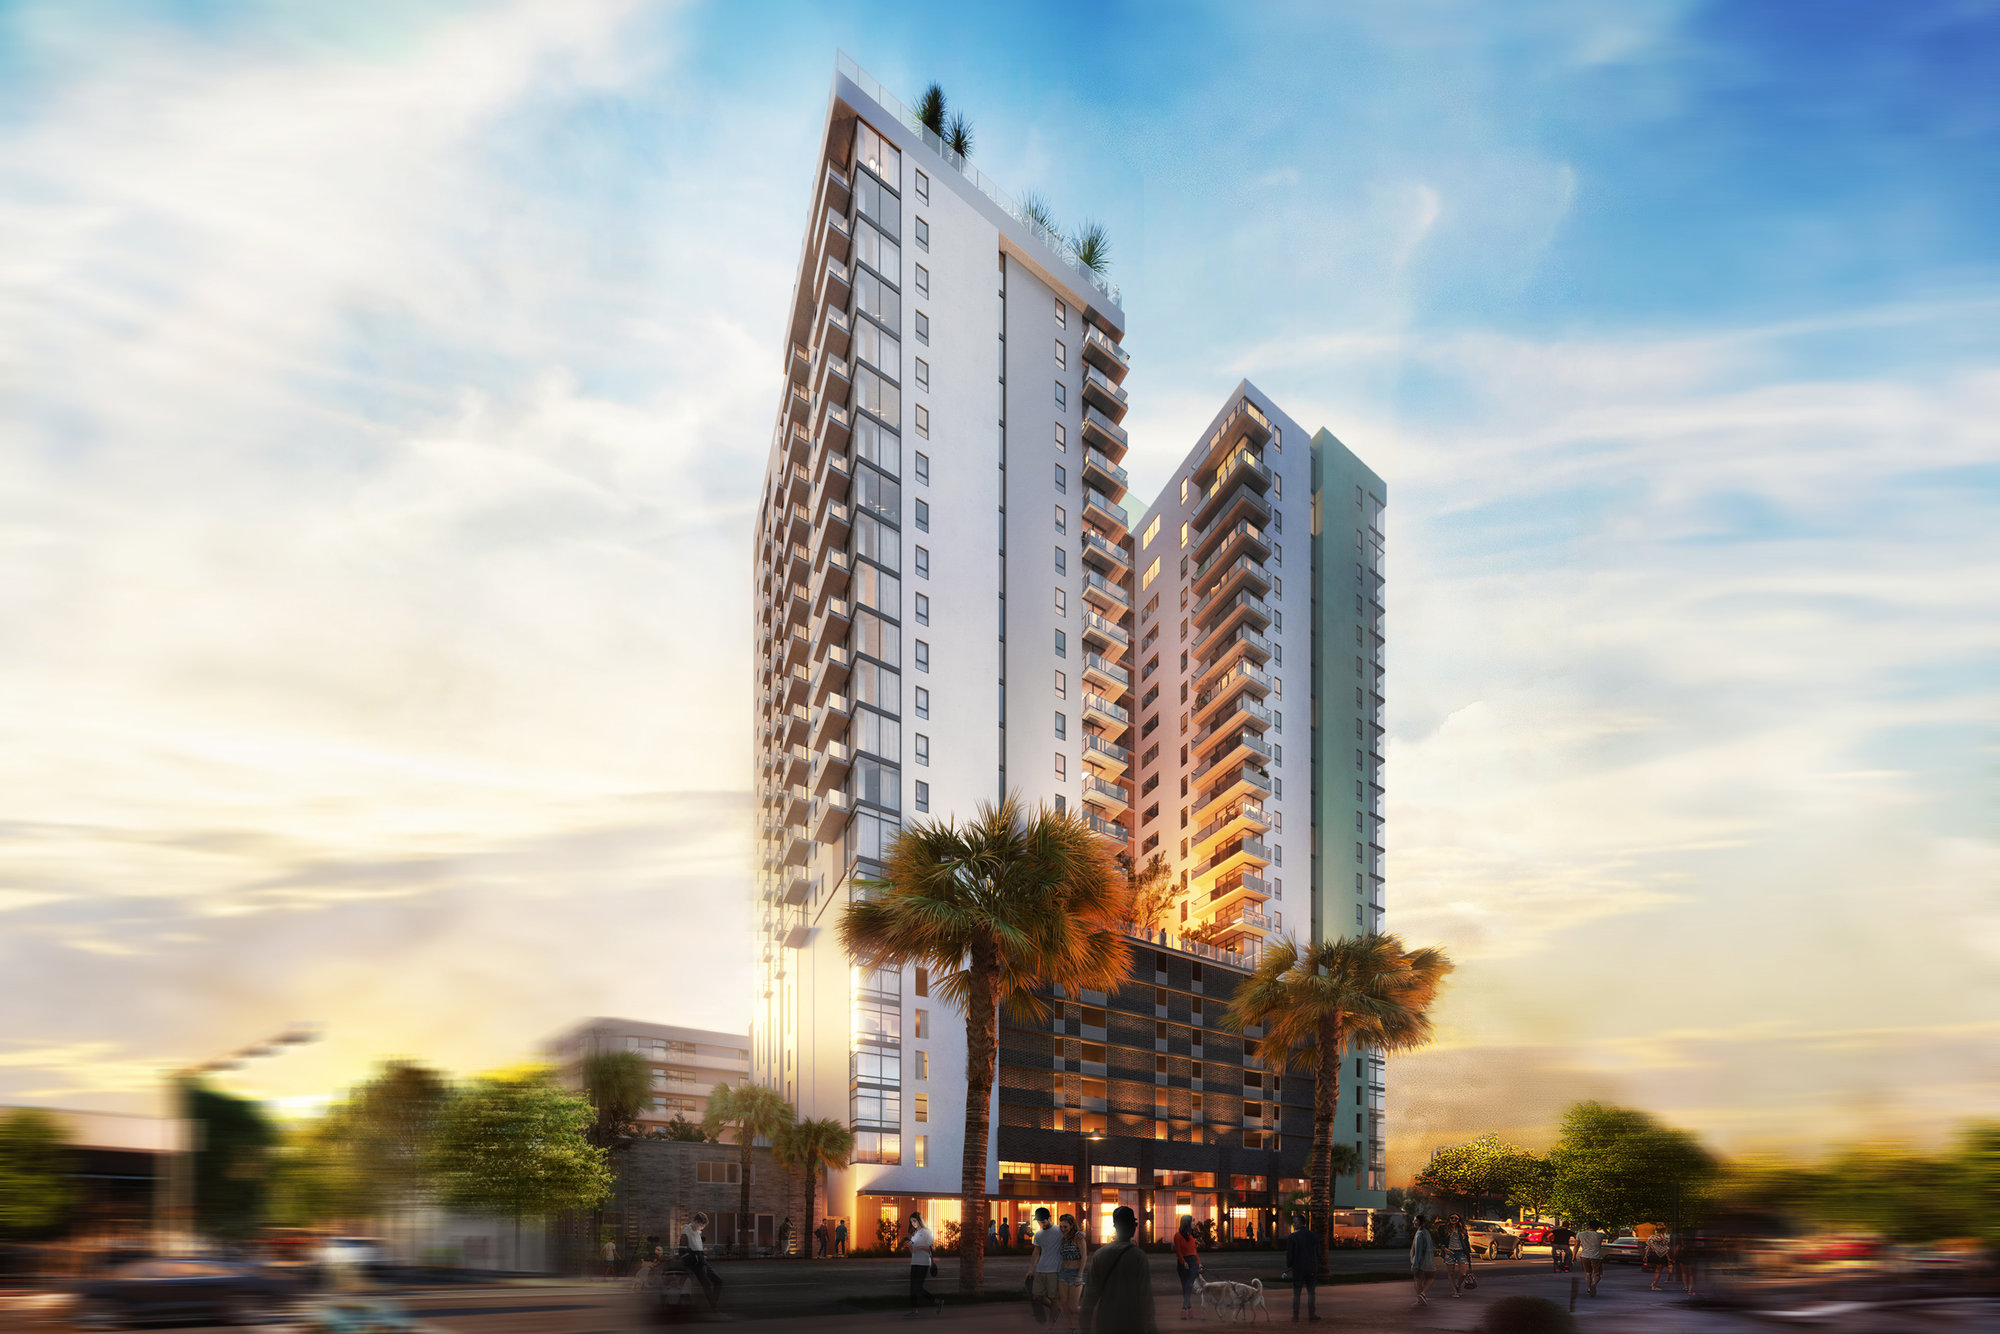 Rendering of the Moontower Phoenix building by LV Collective at sunset.